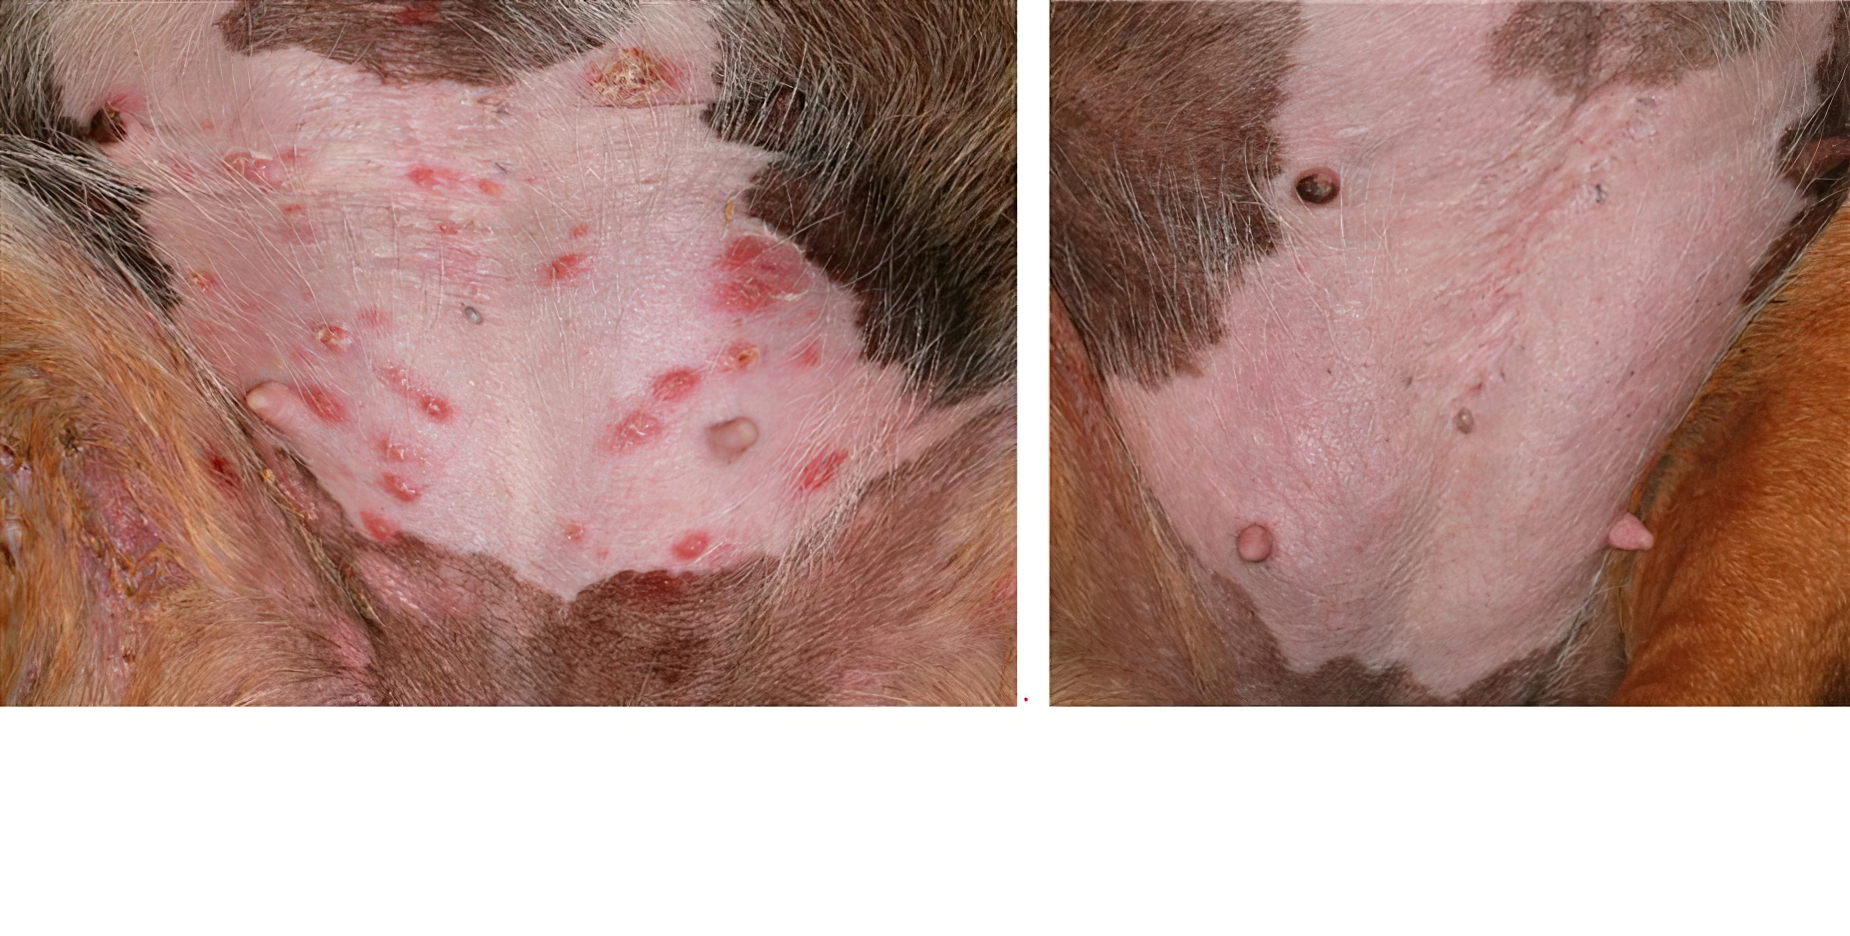 Secondary Bacterial Pyoderma (Staphylococcus Pseudintermedius) - before and after topical treatment, English Bull Terrier